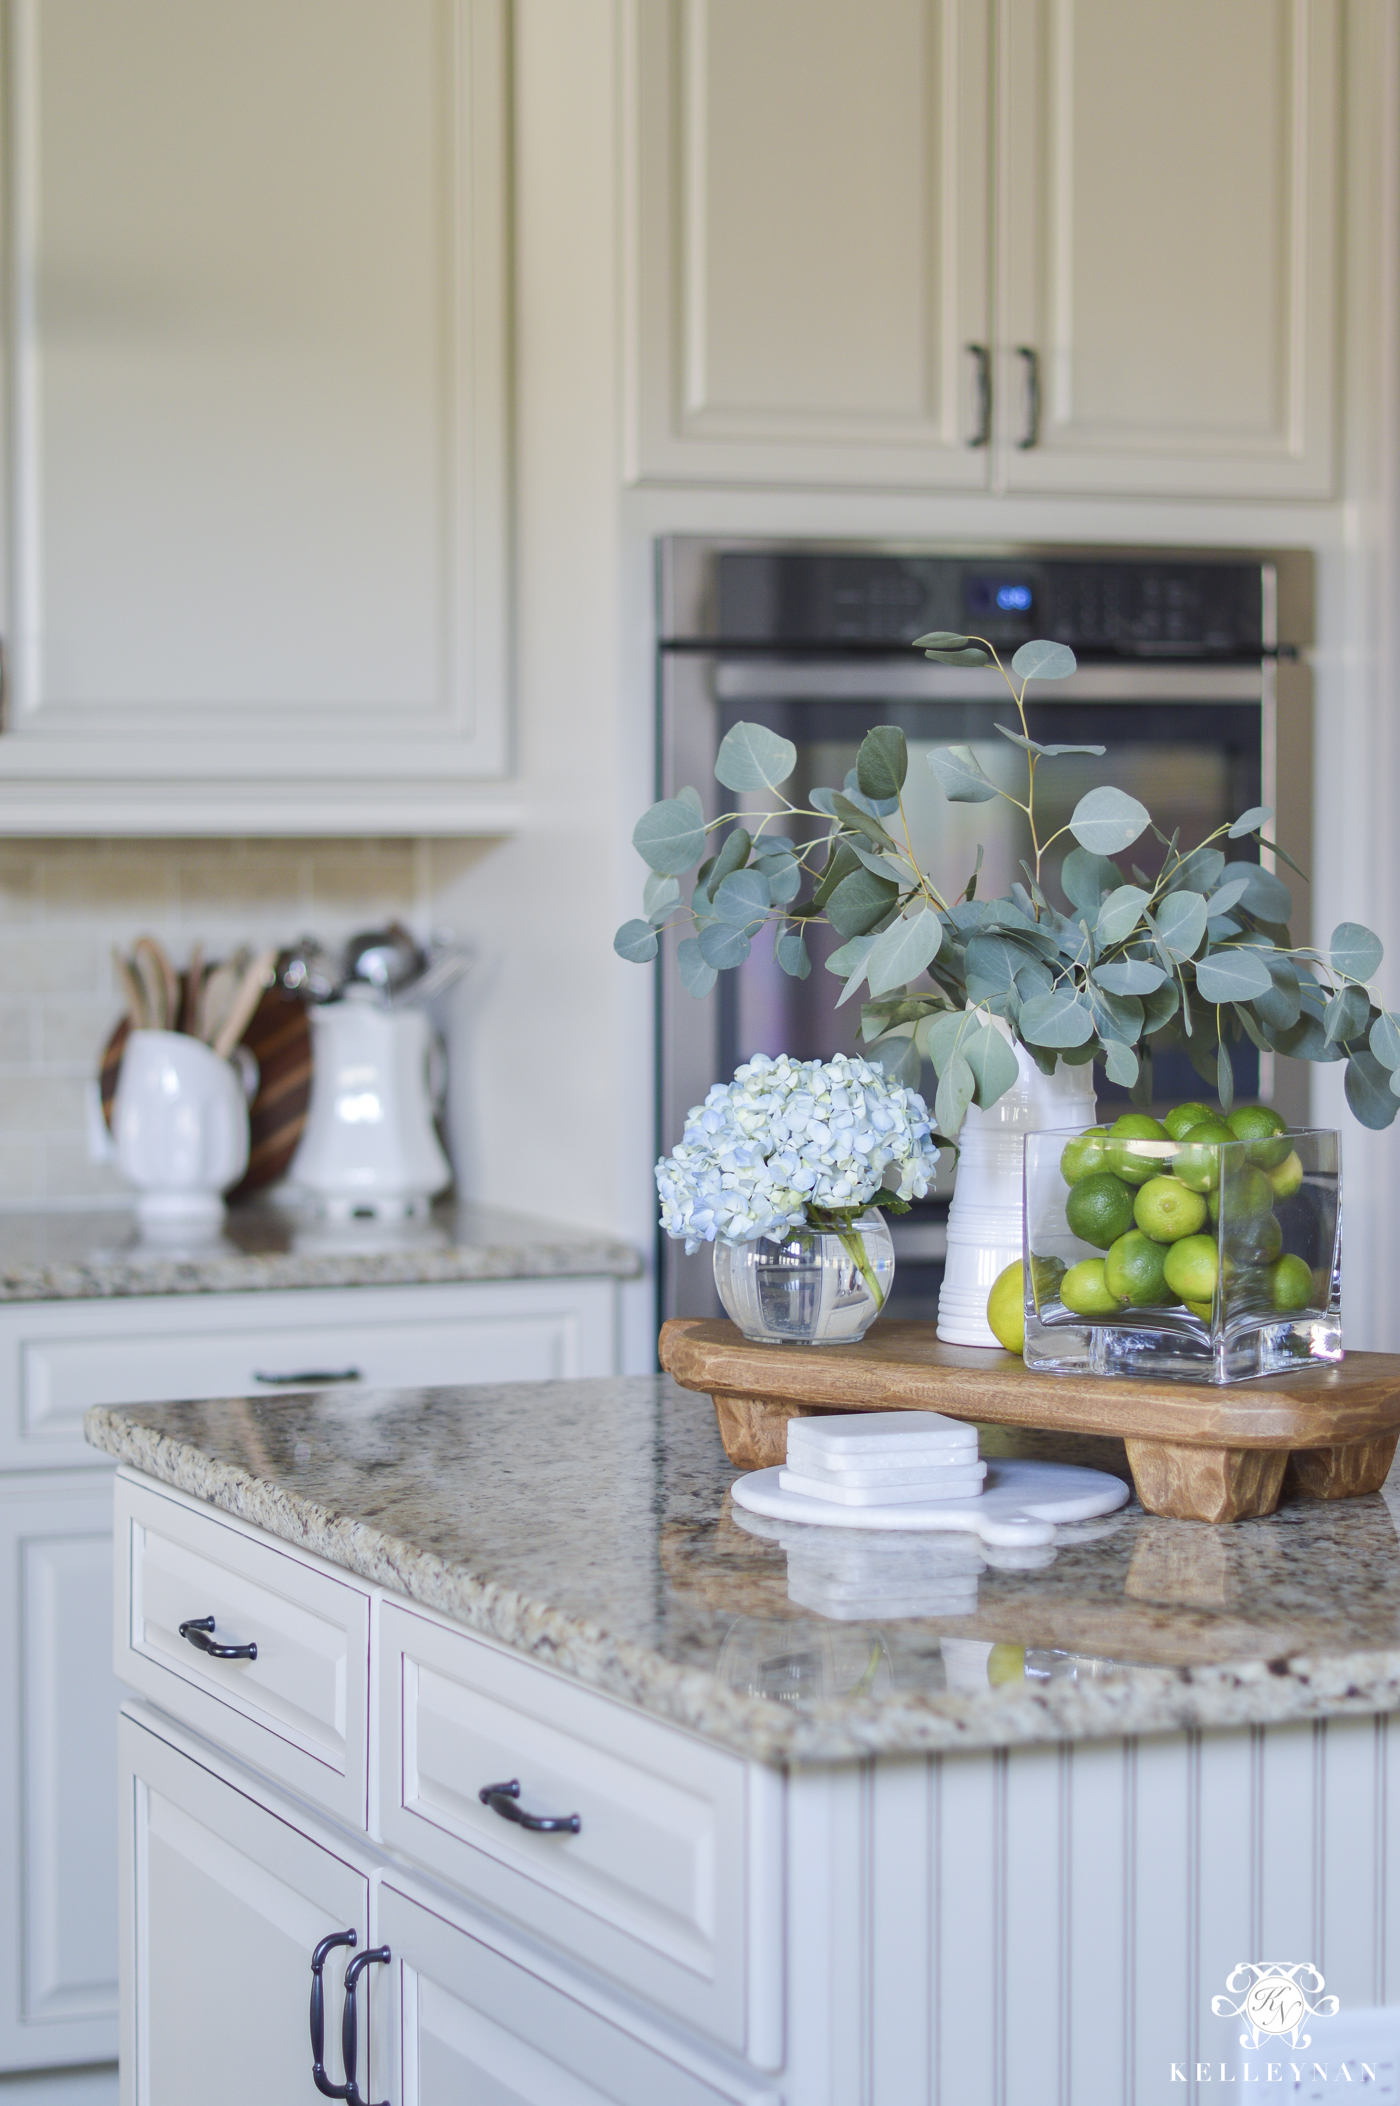 The Prettiest Kitchen Accessories and Counter Top Decor - Kelley Nan